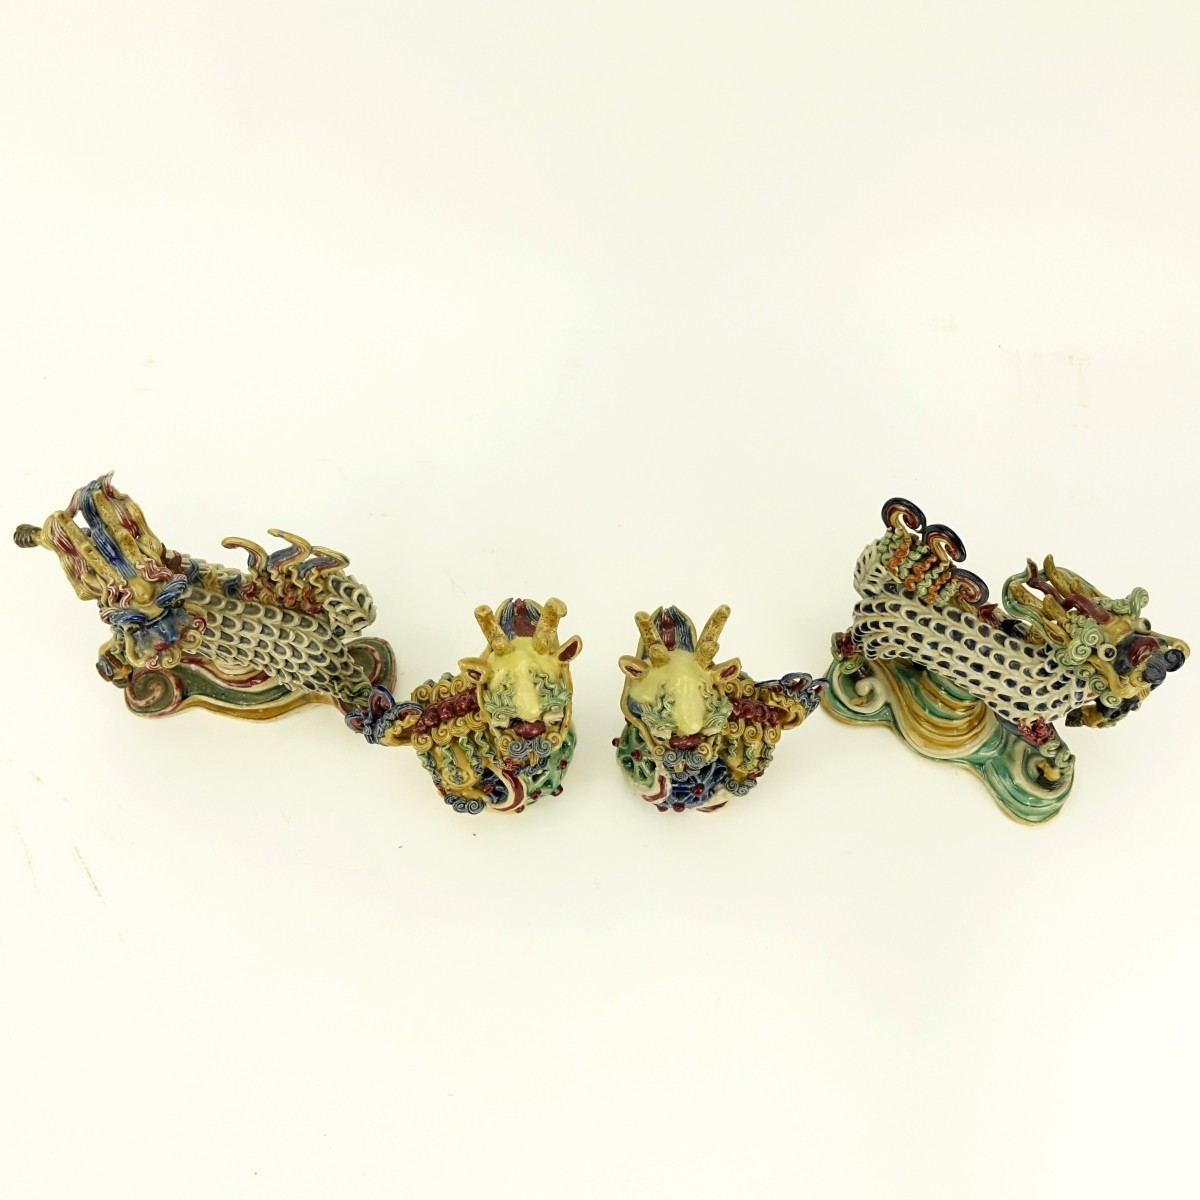 Four (4) Chinese Glazed Pottery Foo Dogs Figures